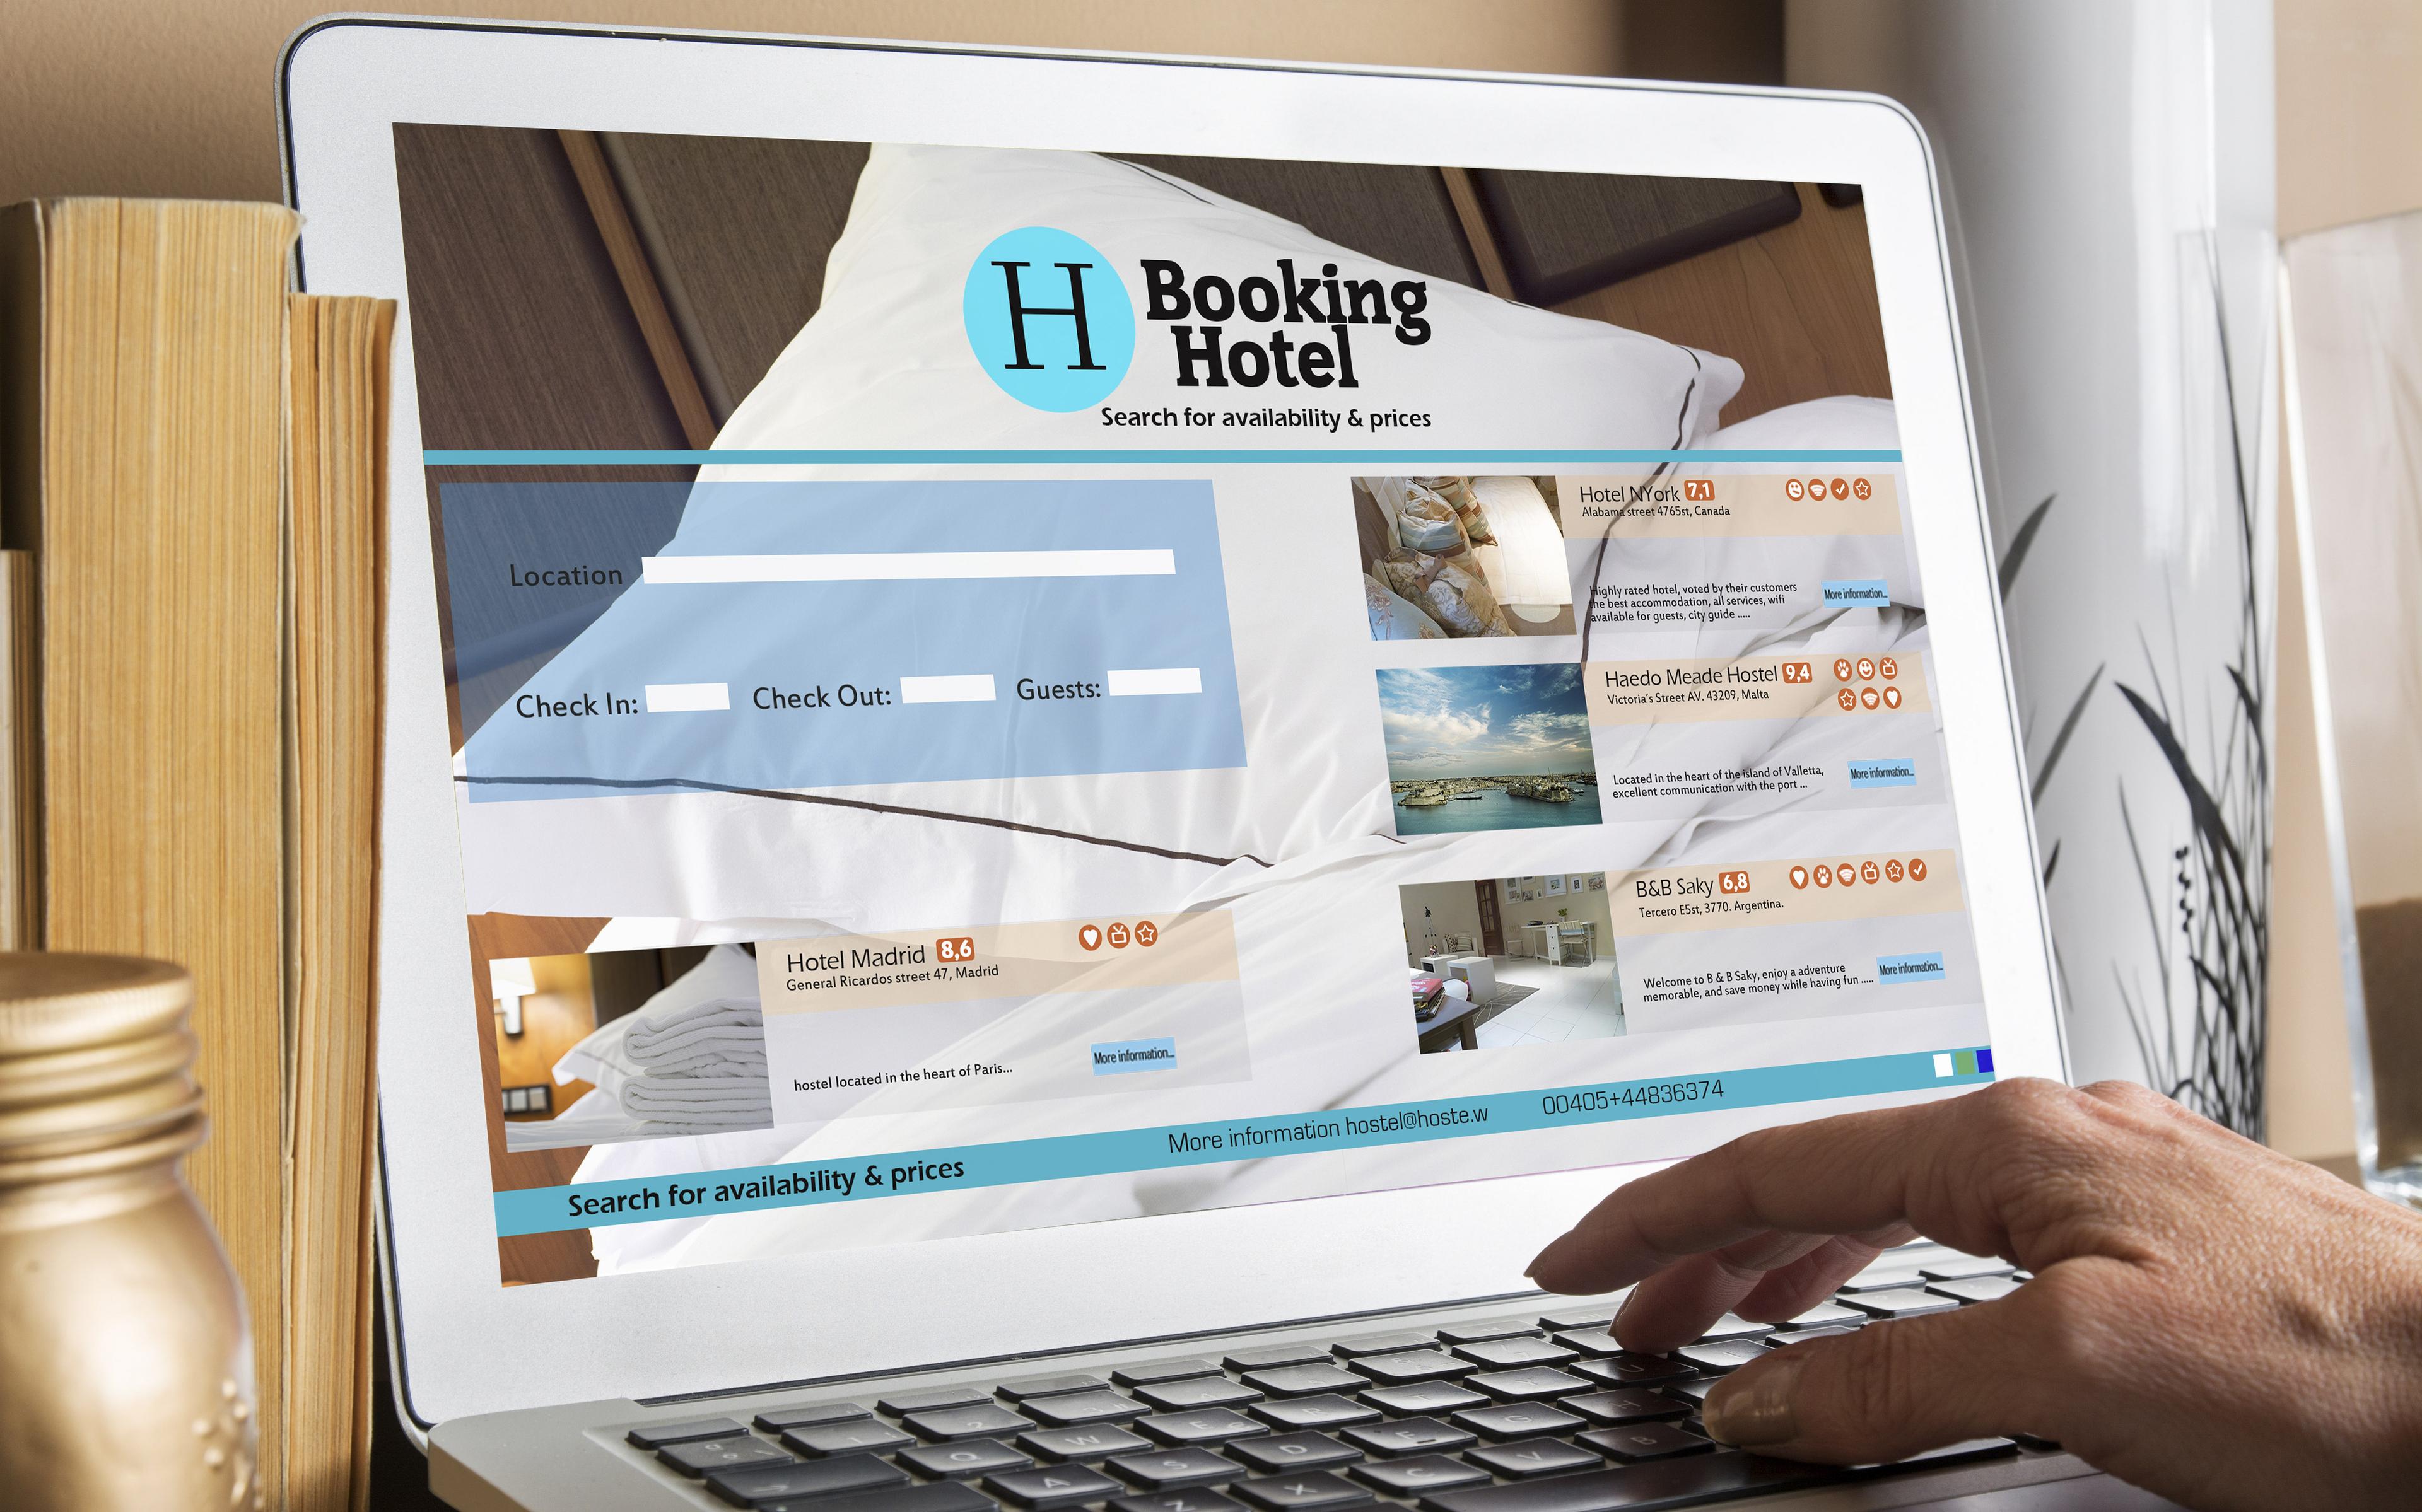 Online hotel bookings to touch one-third mark by 2020: Google-BCG report